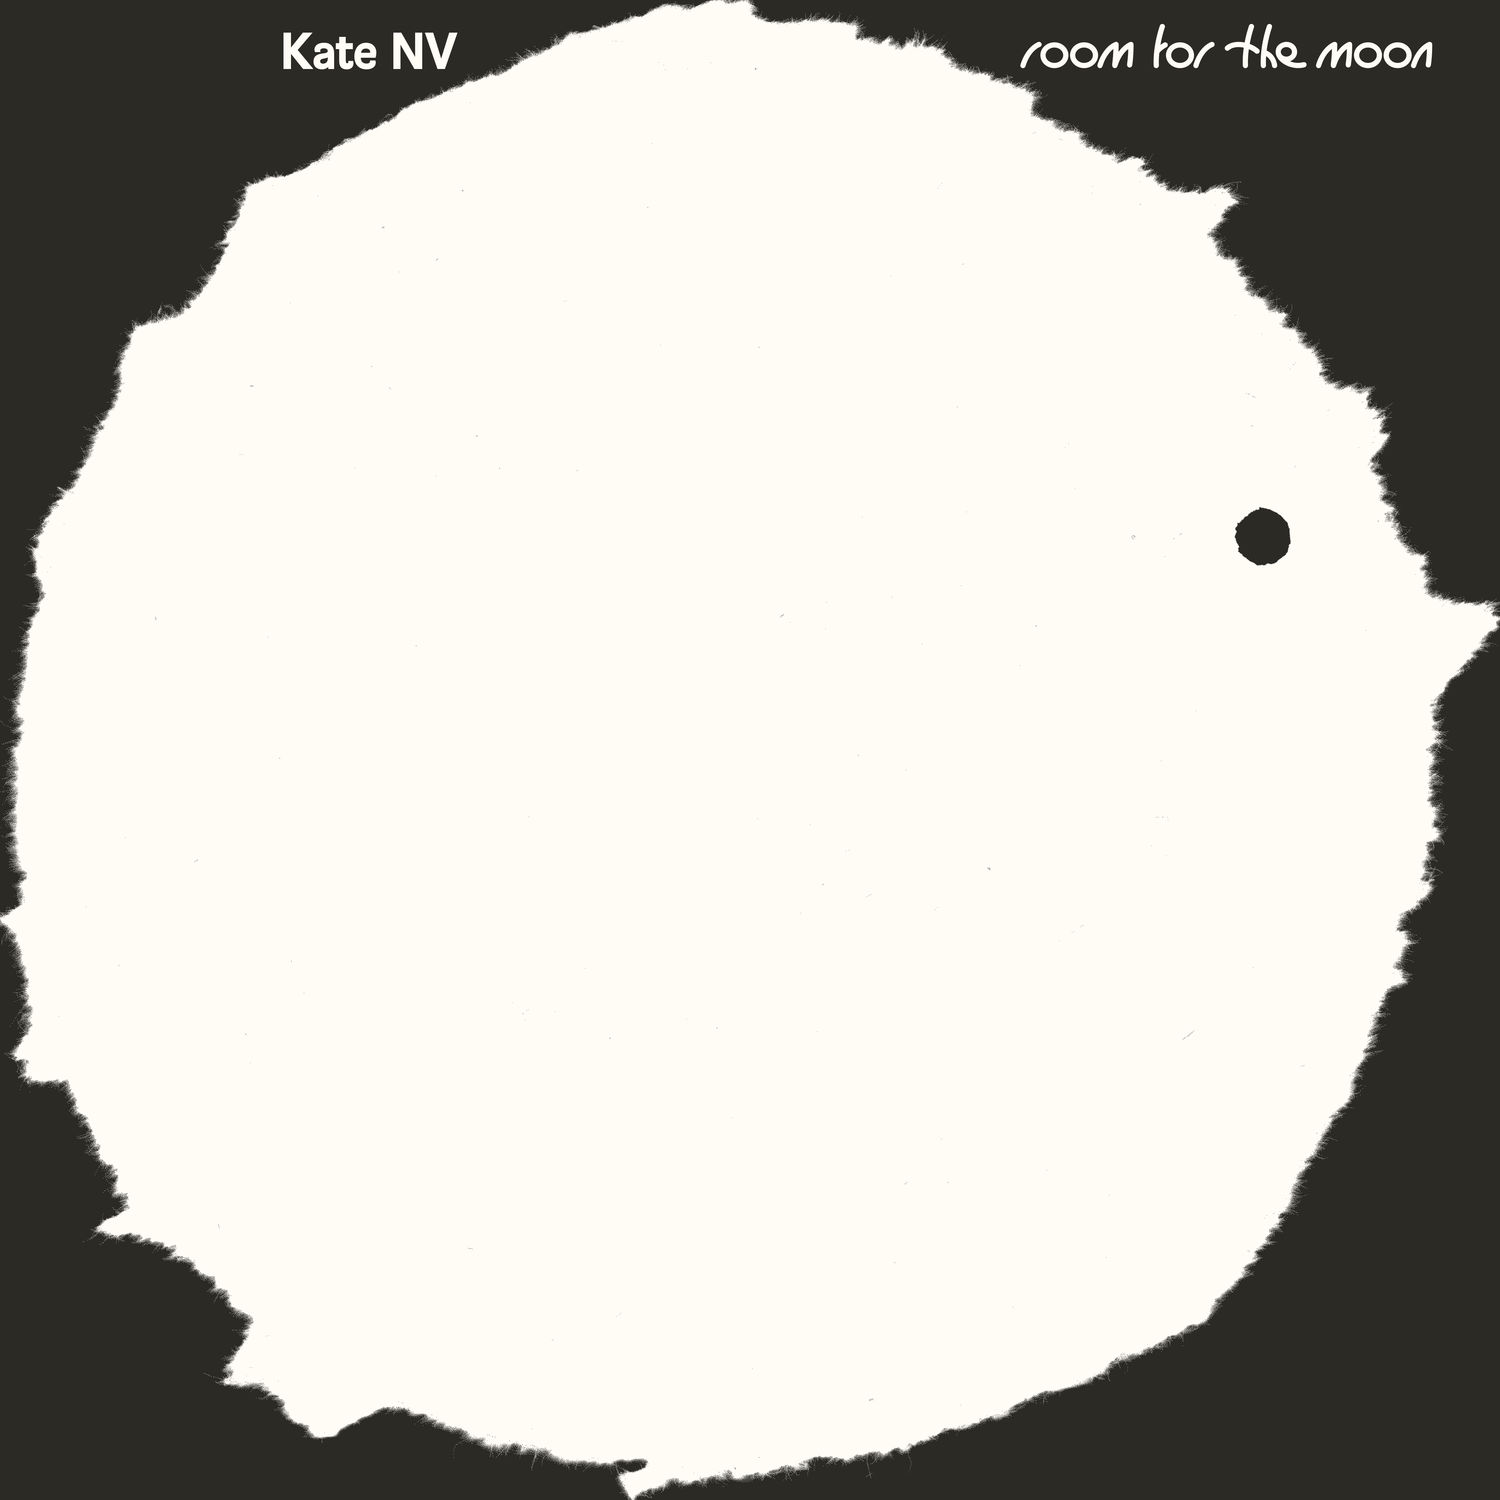 Kate NV - Room for the Moon (2020) [FLAC 24bit/96kHz]